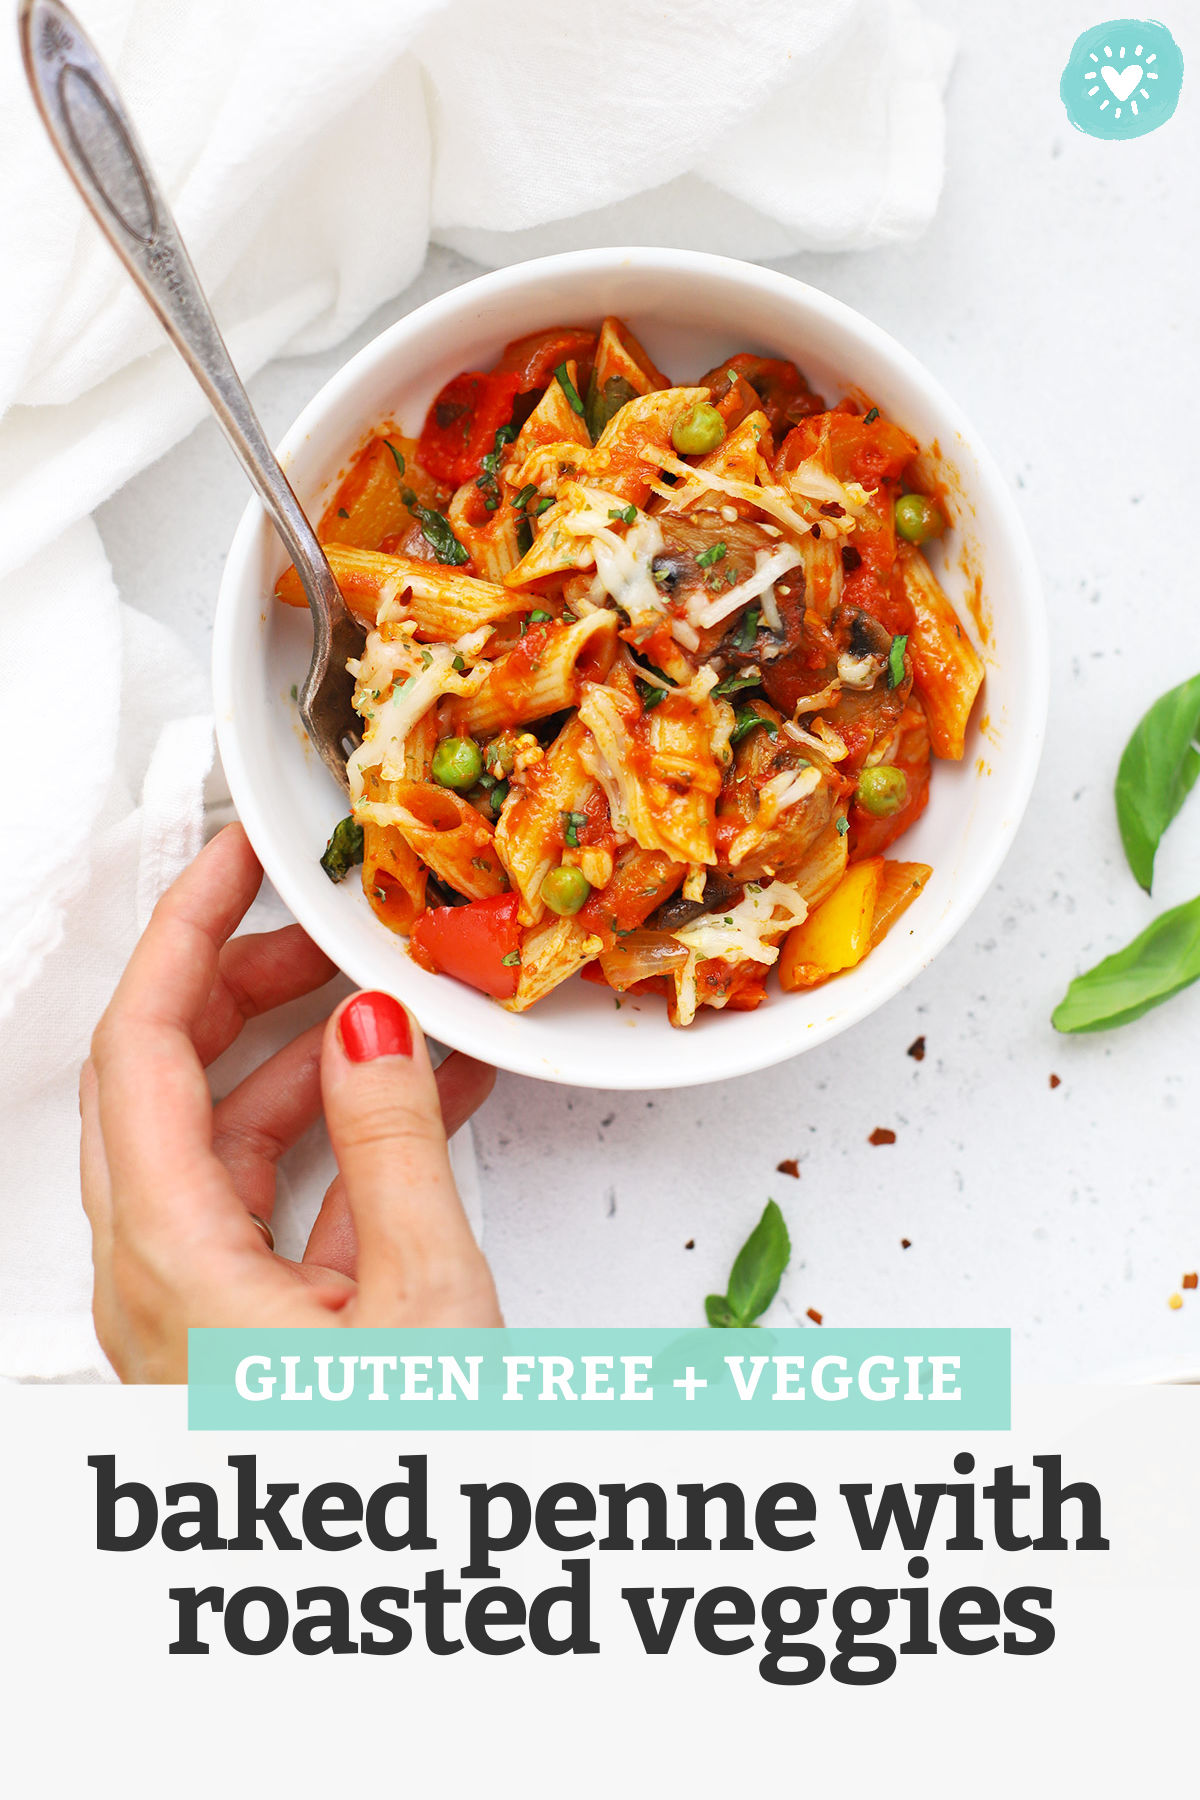 Setting down a bowl of gluten free baked penne with roasted veggies with text overlay that reads "Gluten-Free + Veggie Baked Penne with Roasted Veggies"